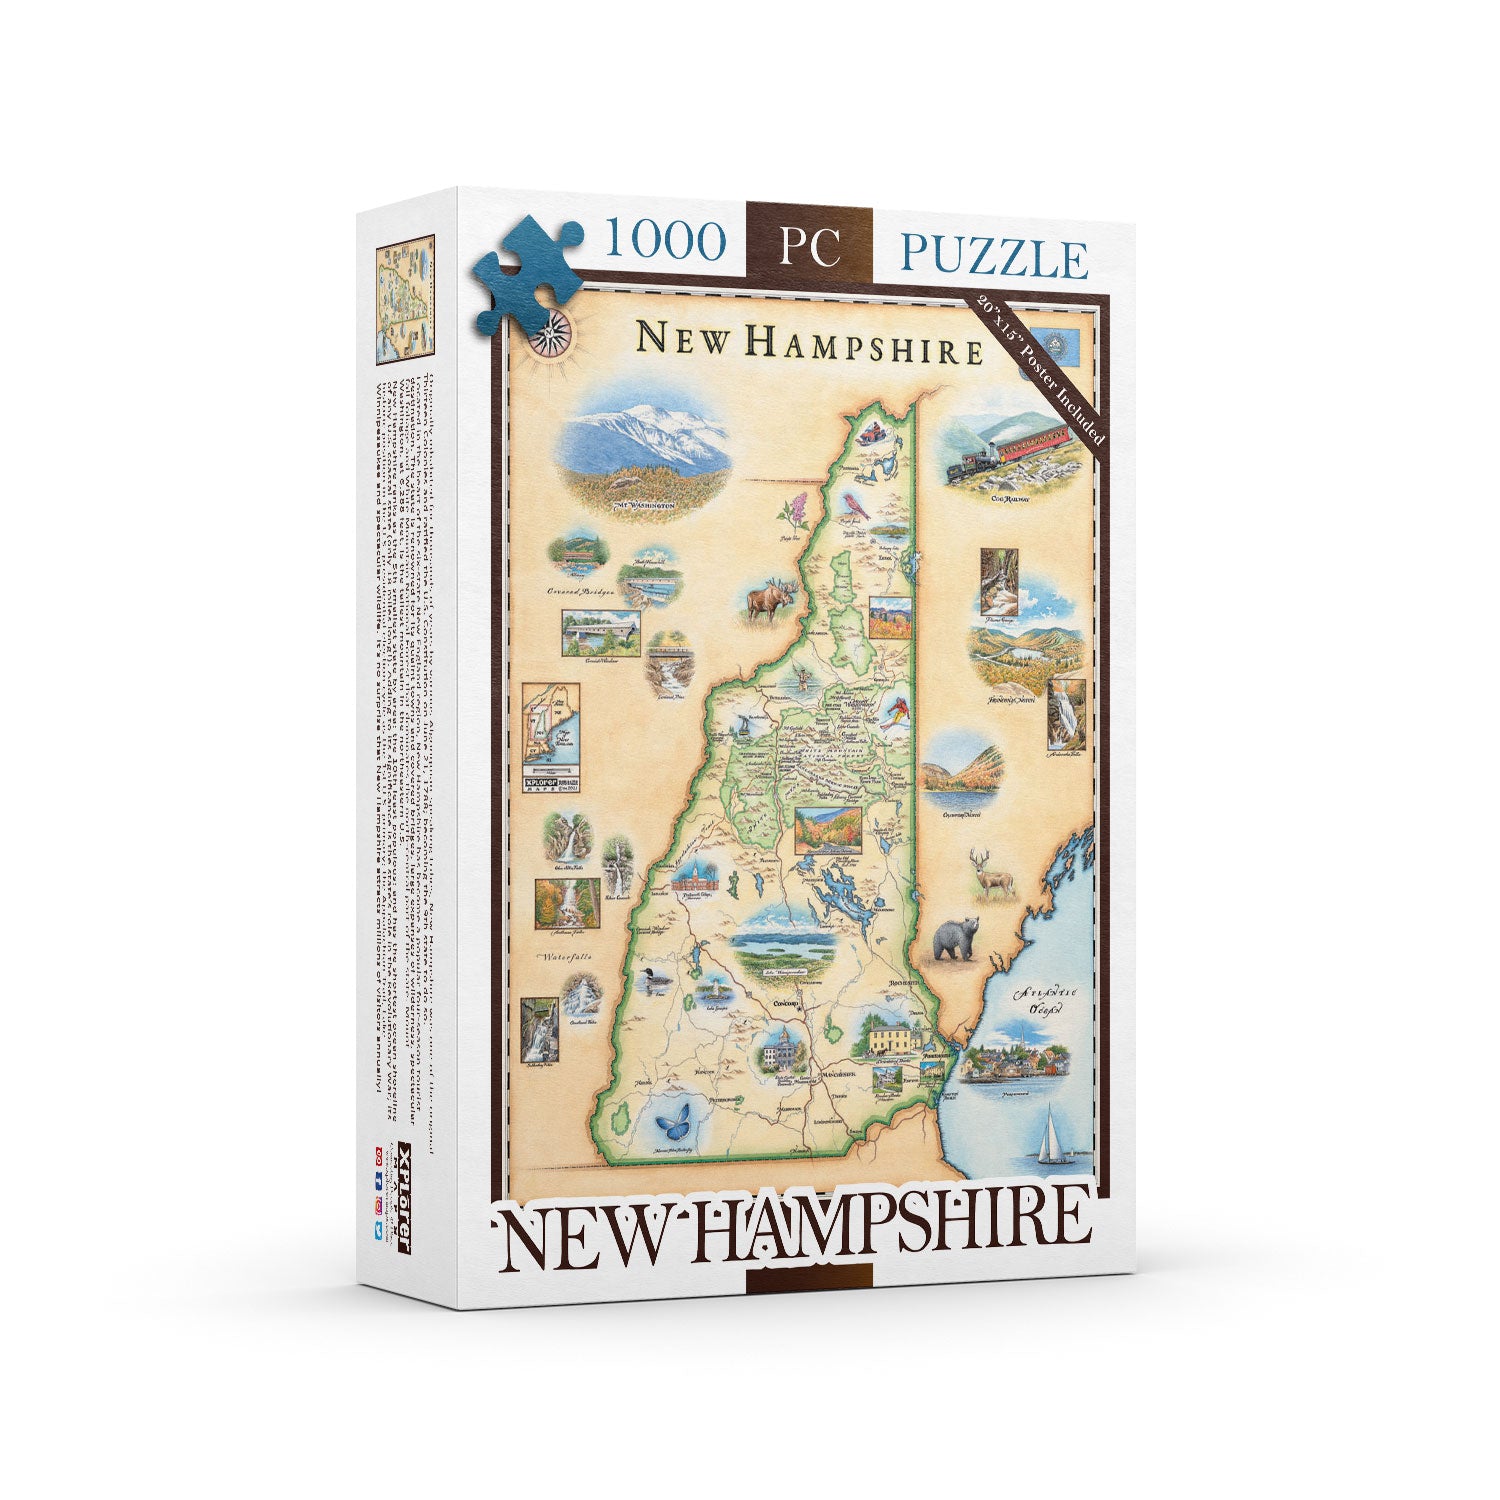 New Hampshire State Map Jigsaw Puzzle by Xplorer Maps. The map features illustrations of the Cog Railway, Crawford Notch, Portsmouth, moose, deer, and Mount Washington. 